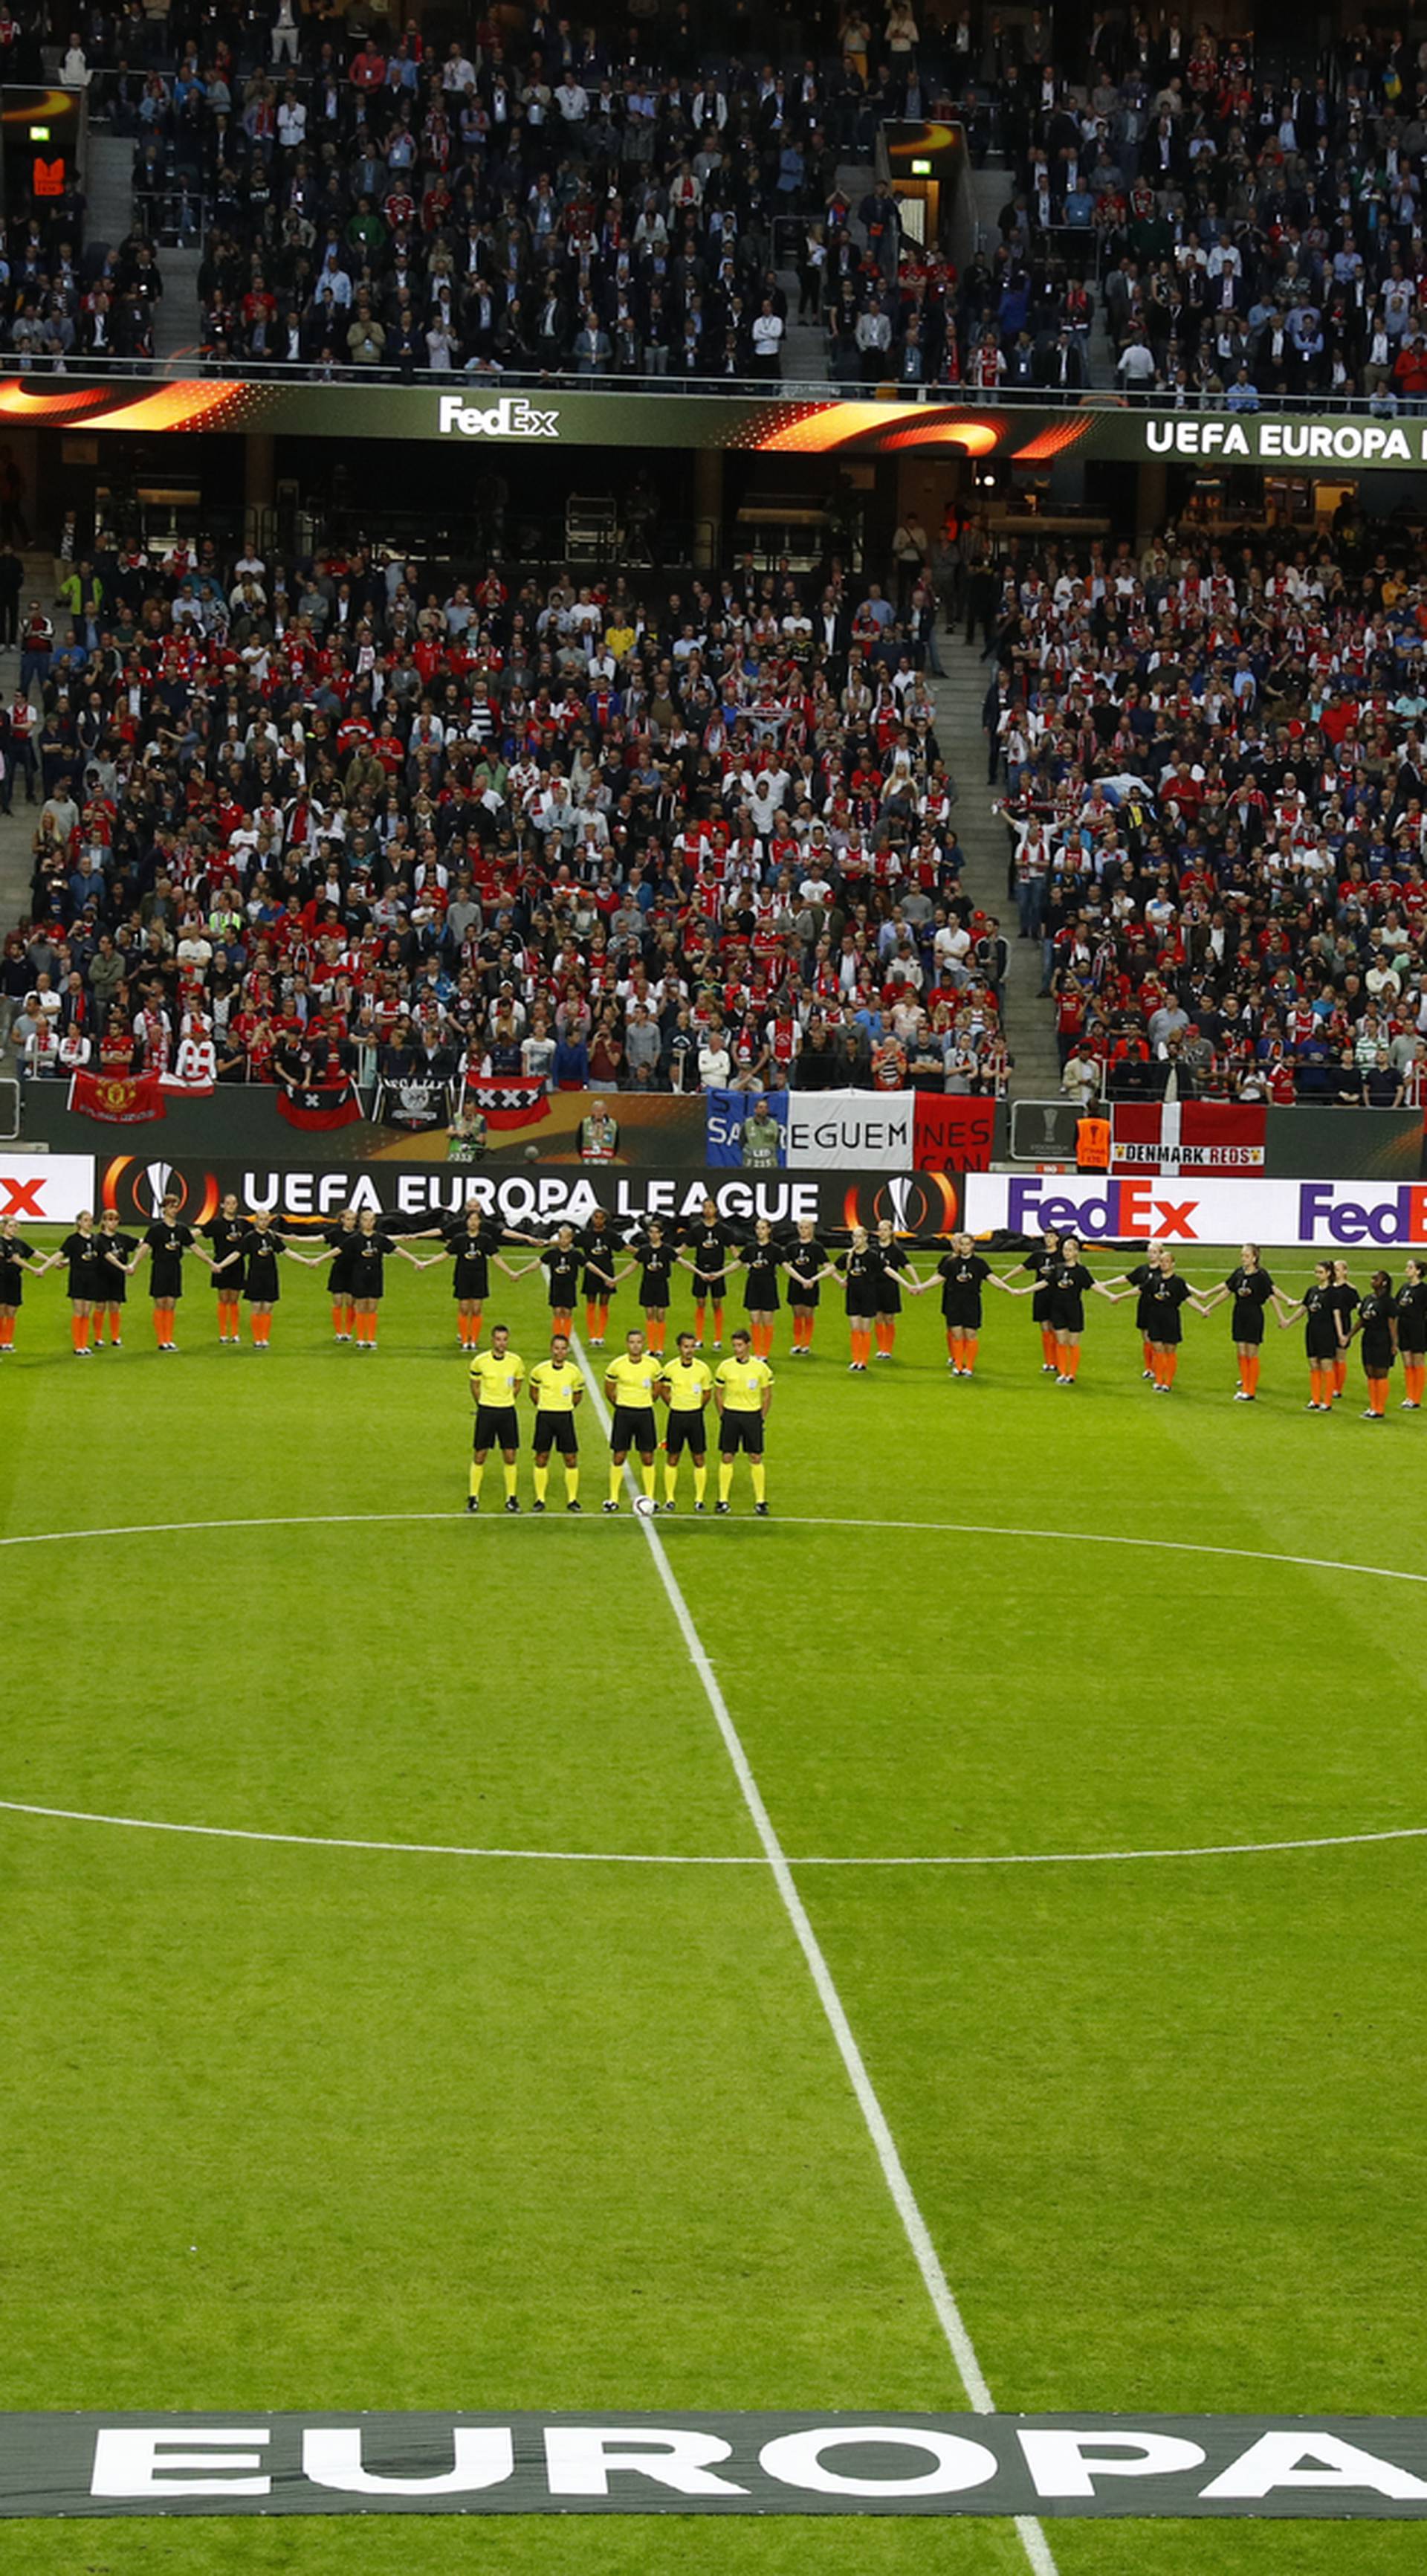 Players, officials and fans observe a minute of silence in tribute to the victims of the Manchester attack